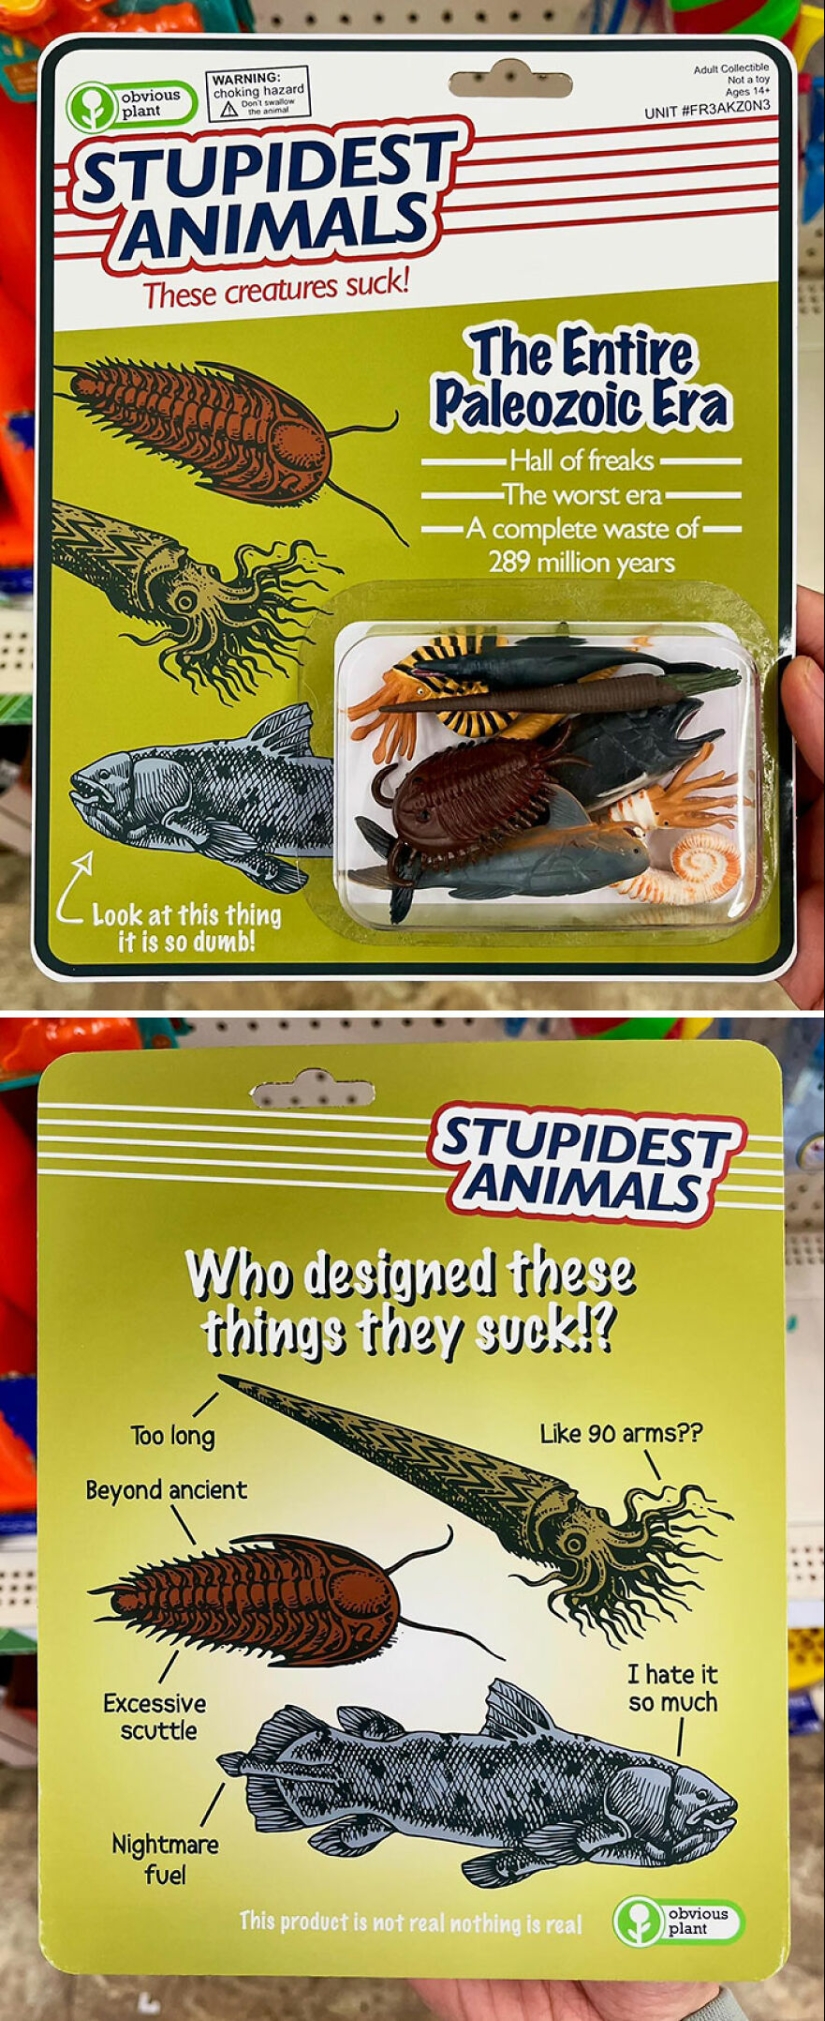 10 Hilarious Fake Products Placed Among Real Ones In Stores By “Obvious Plant”